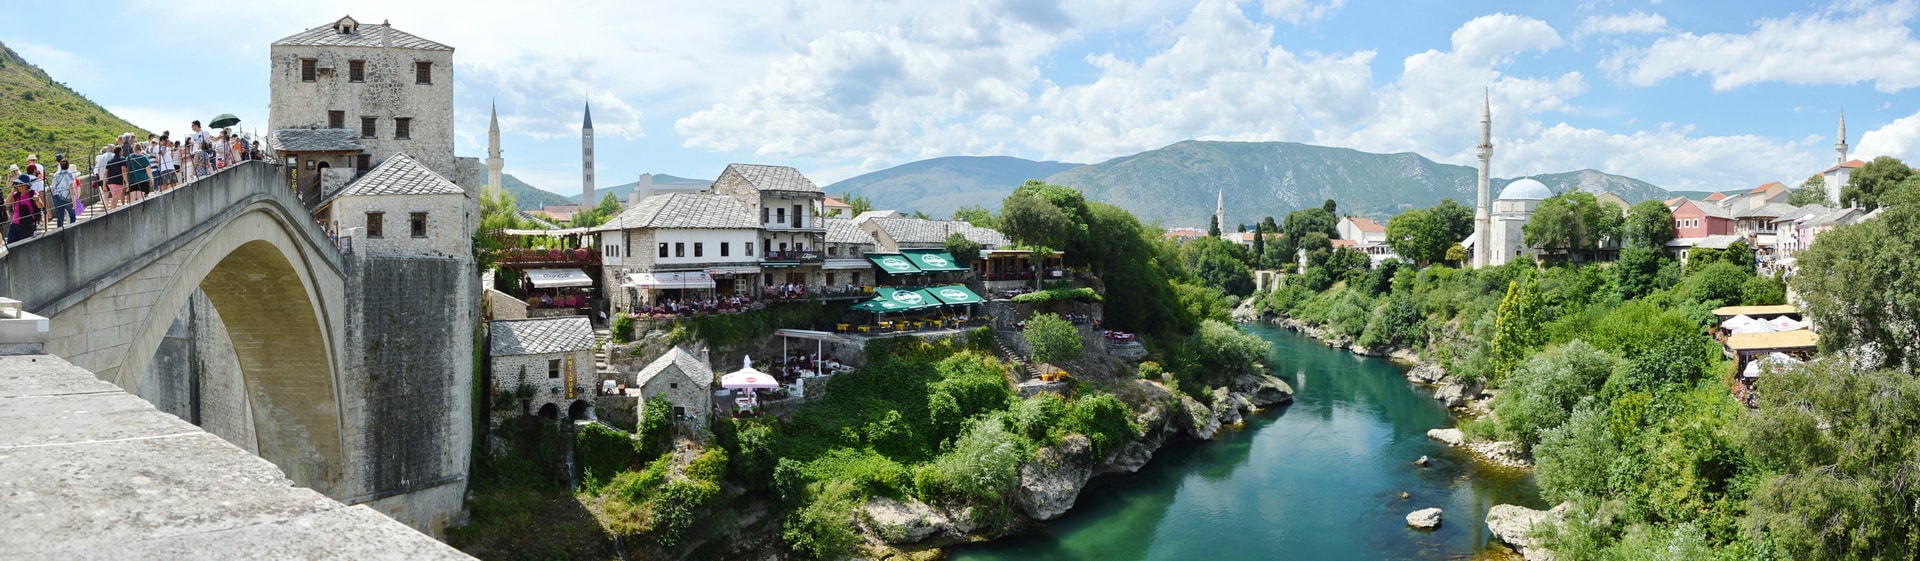 View of the Neretva River from the Old Bridge